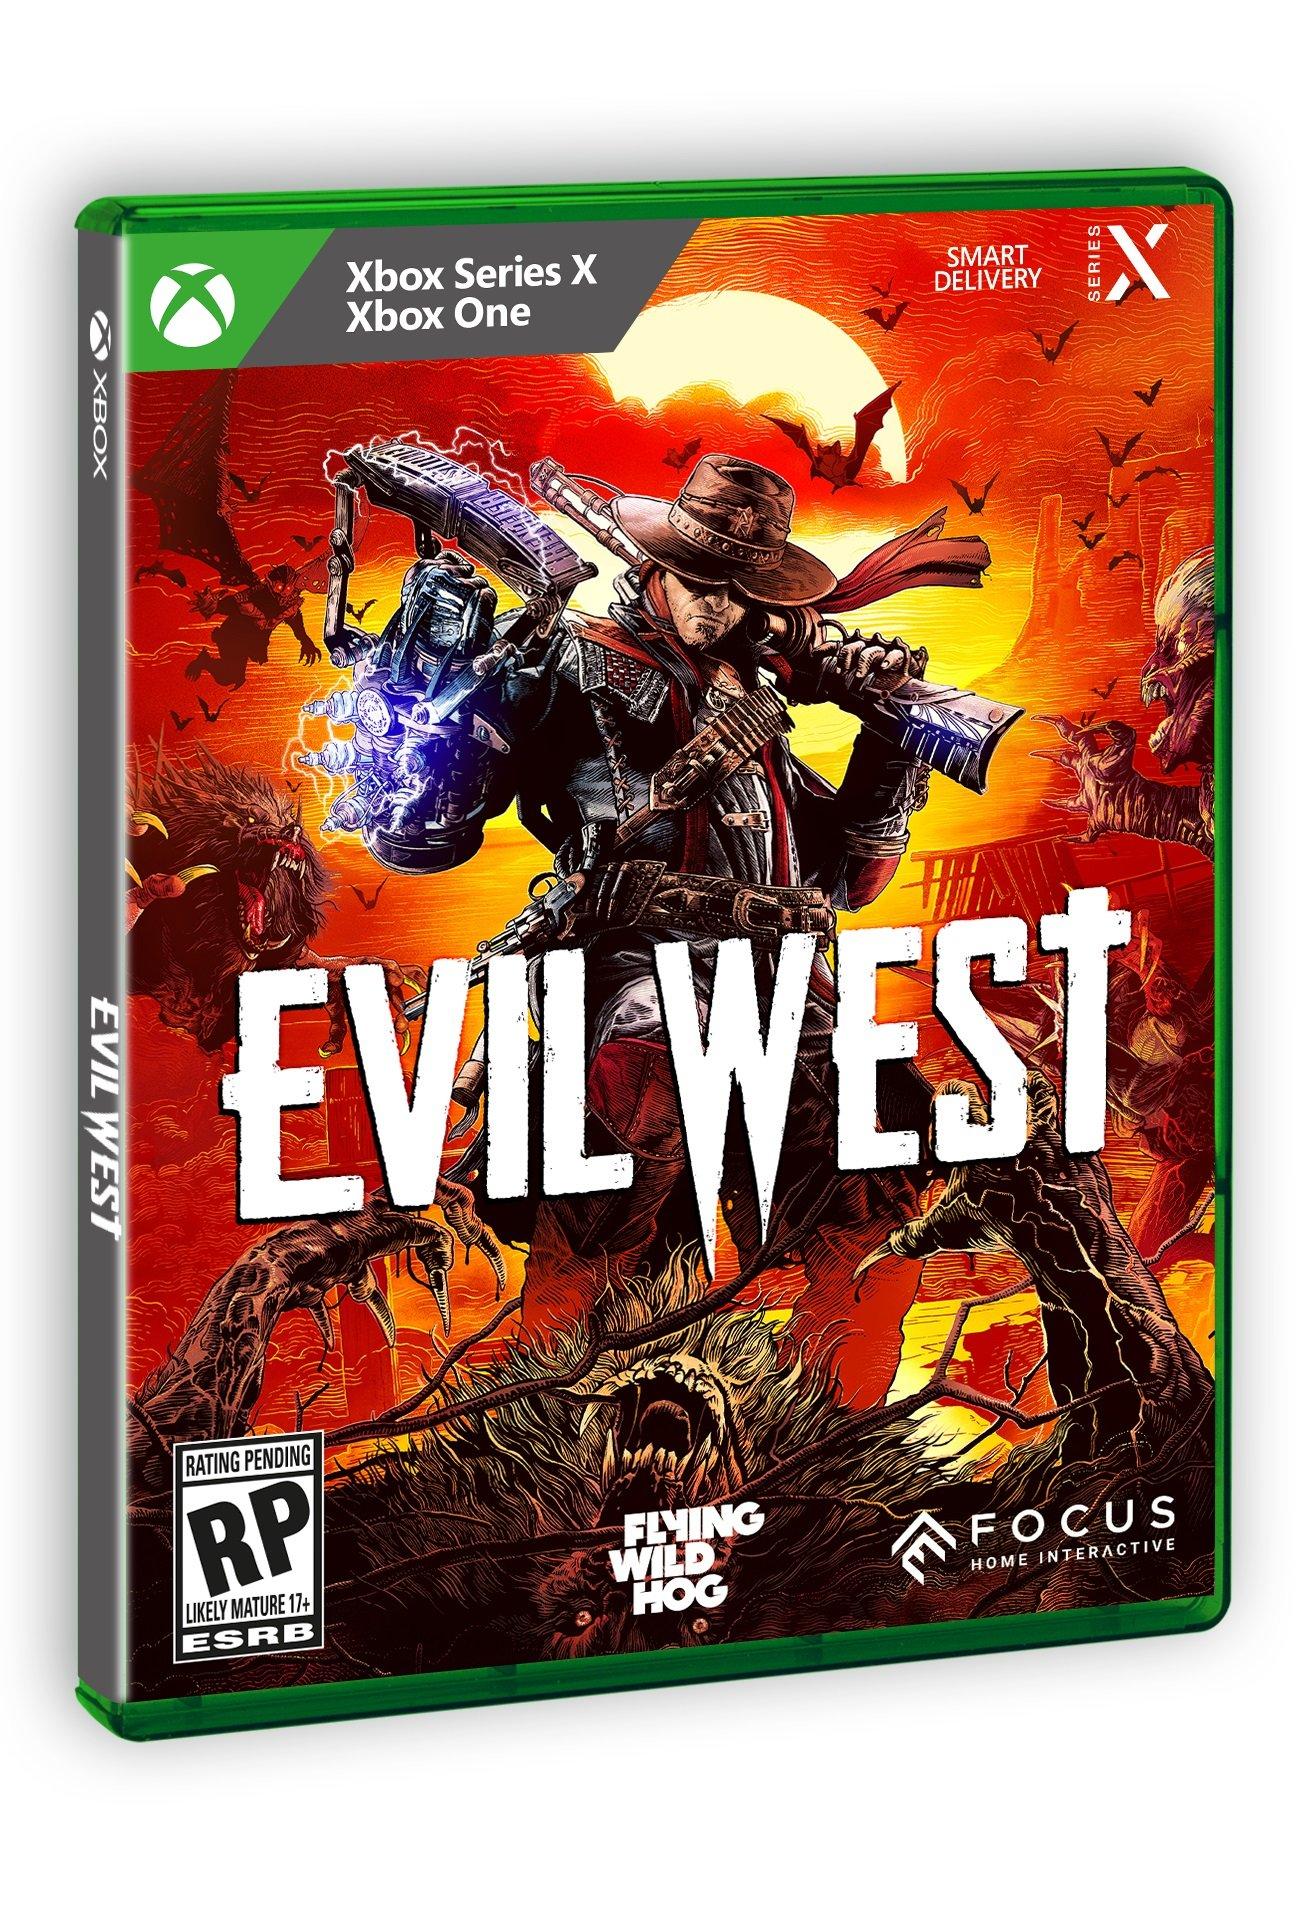 Evil West Xbox Series XS and Xbox One resolution and modes revealed